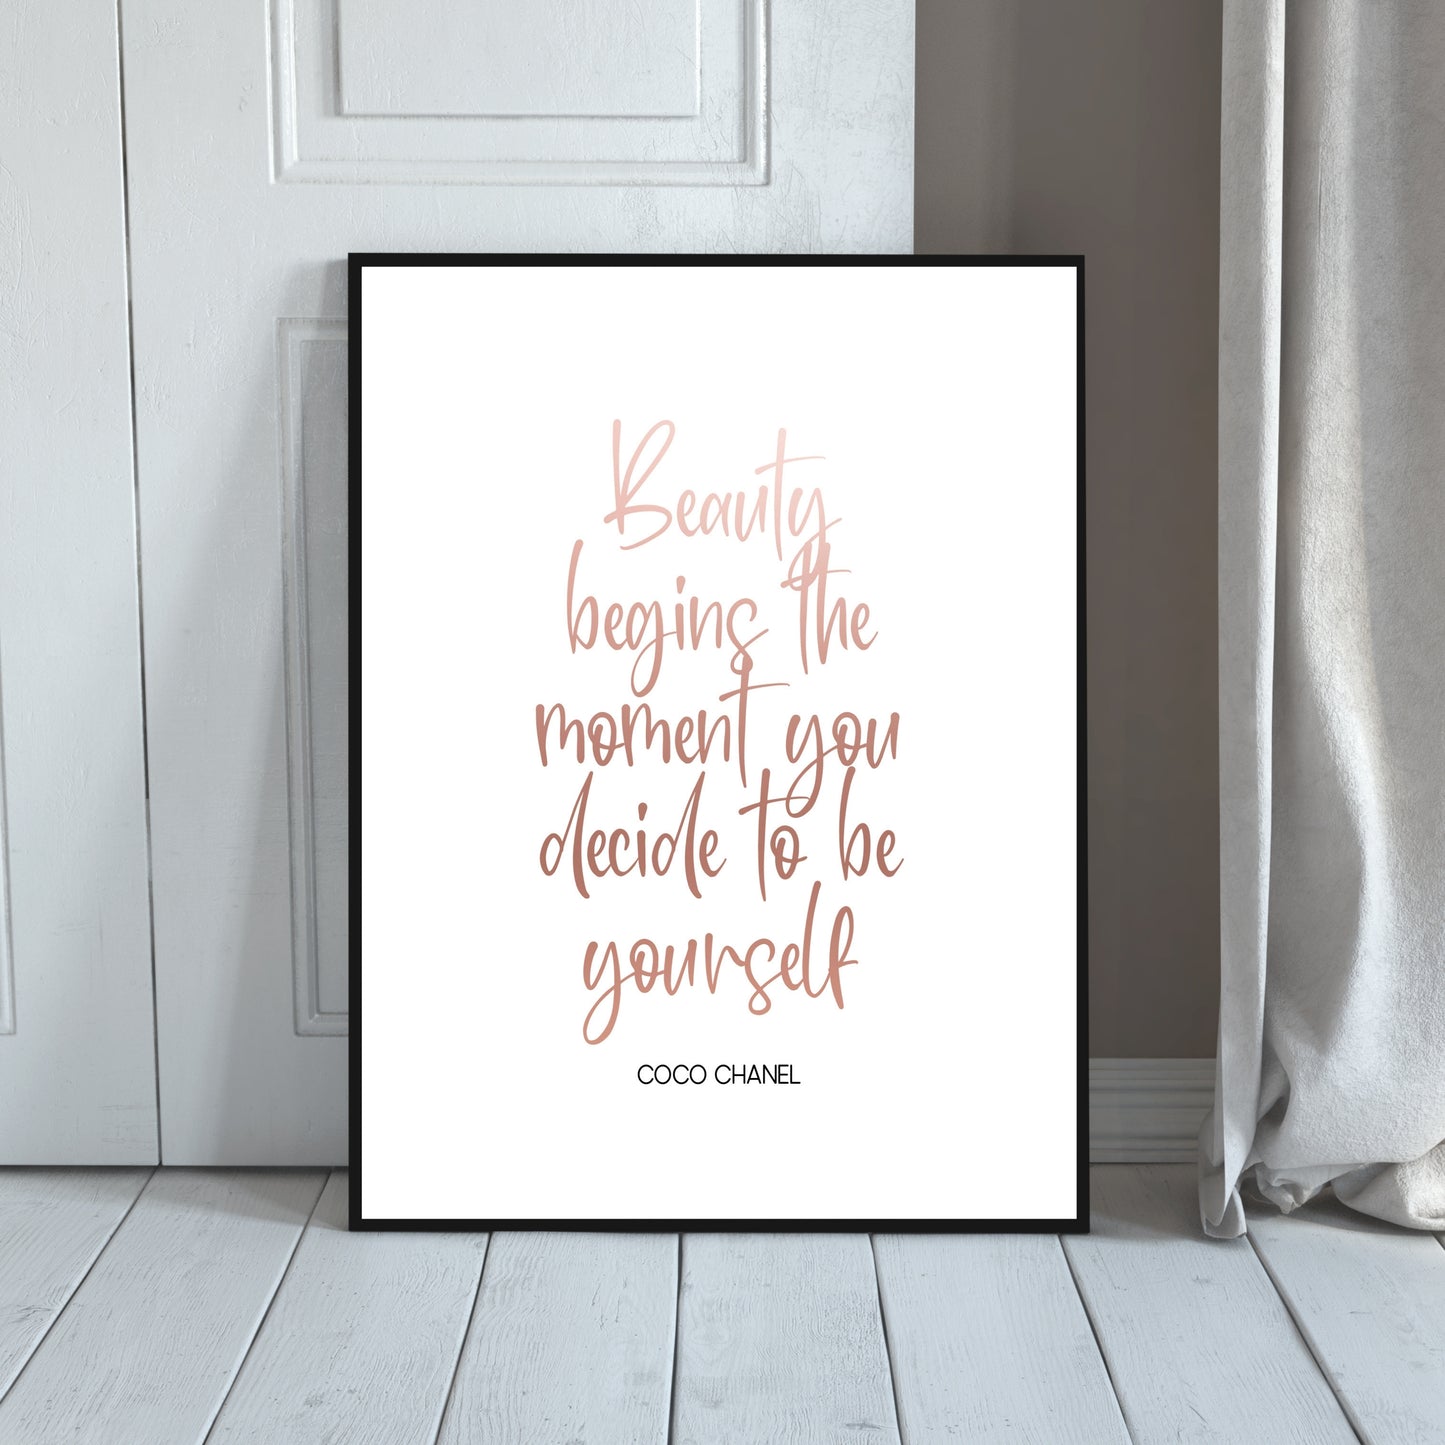 "Beauty Begins The Moment You Decide To Be Yourself" Famous Quote by Coco Chanel in Rose Gold, Printable Art